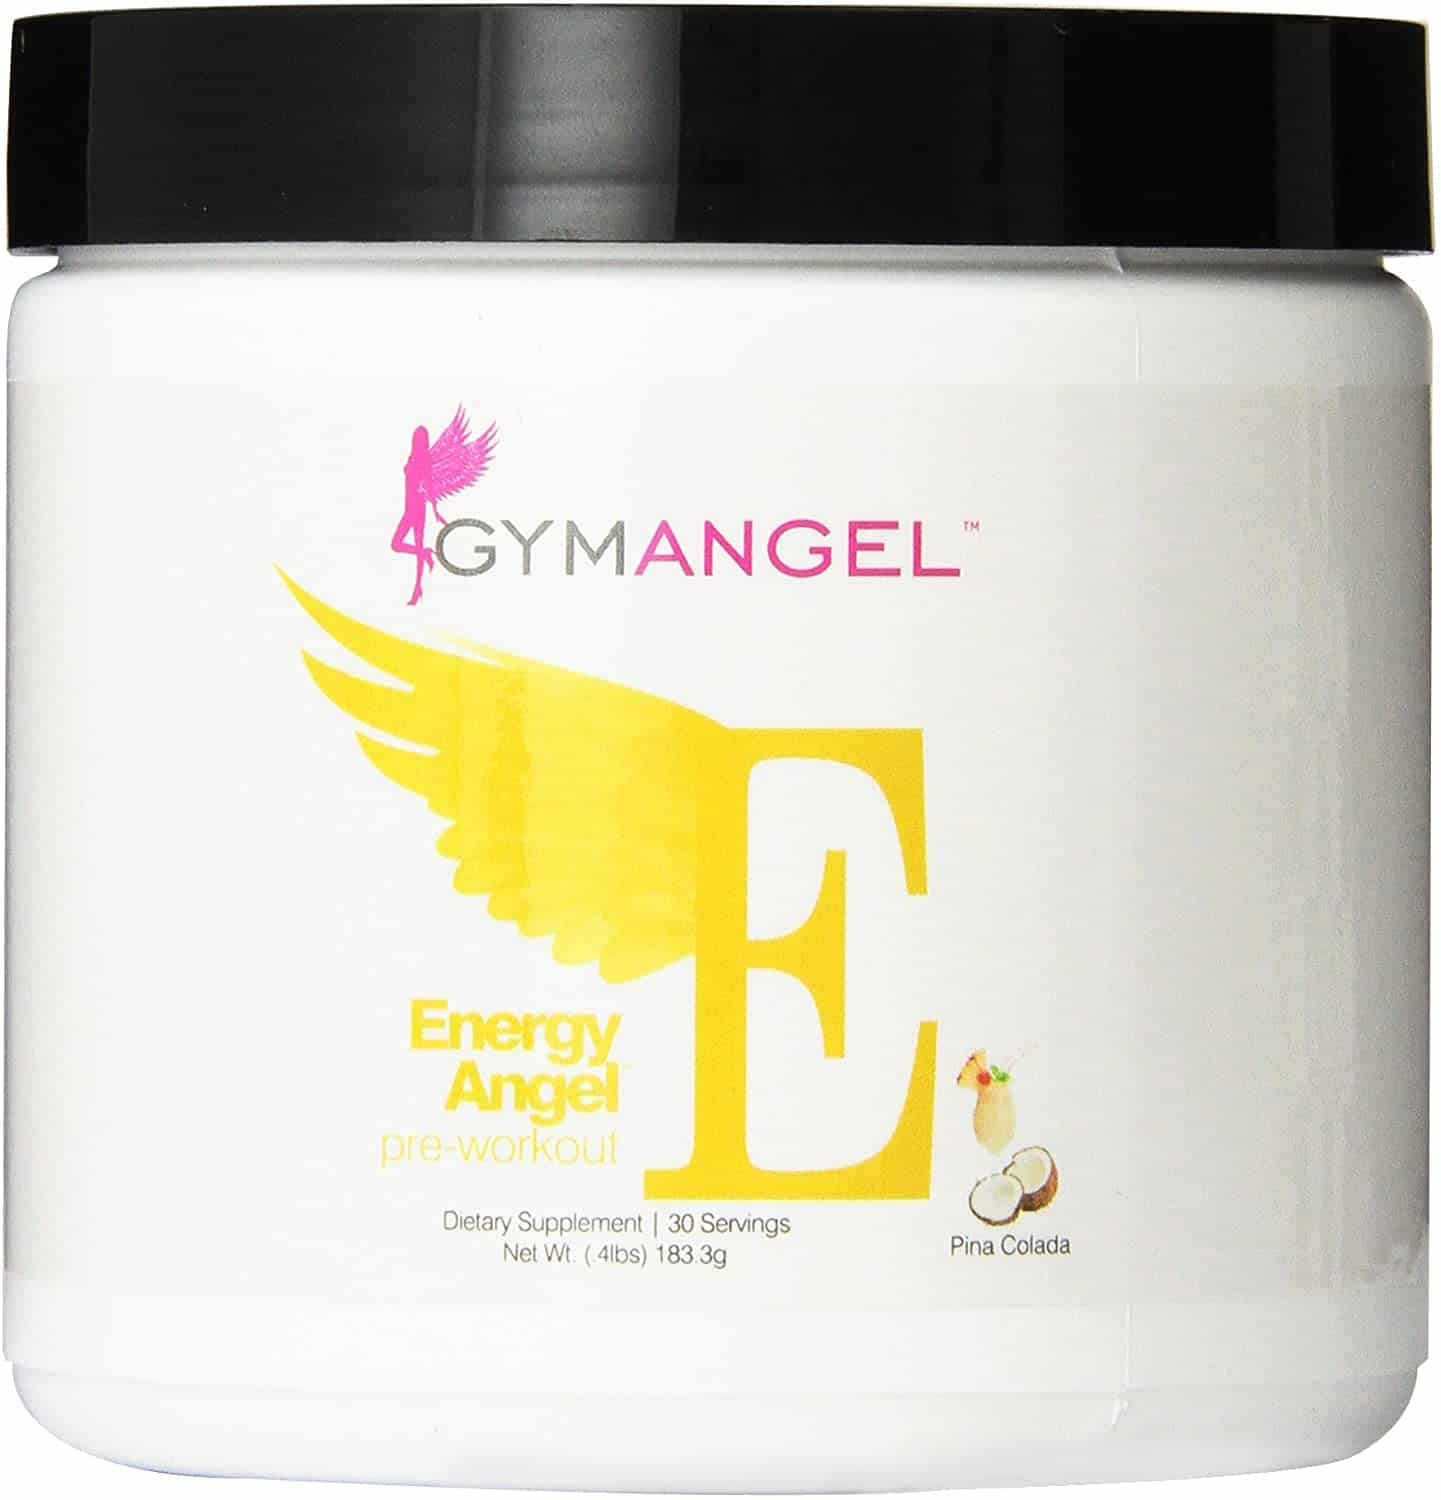 Gym angel ranks as one of the best pre workout supplements